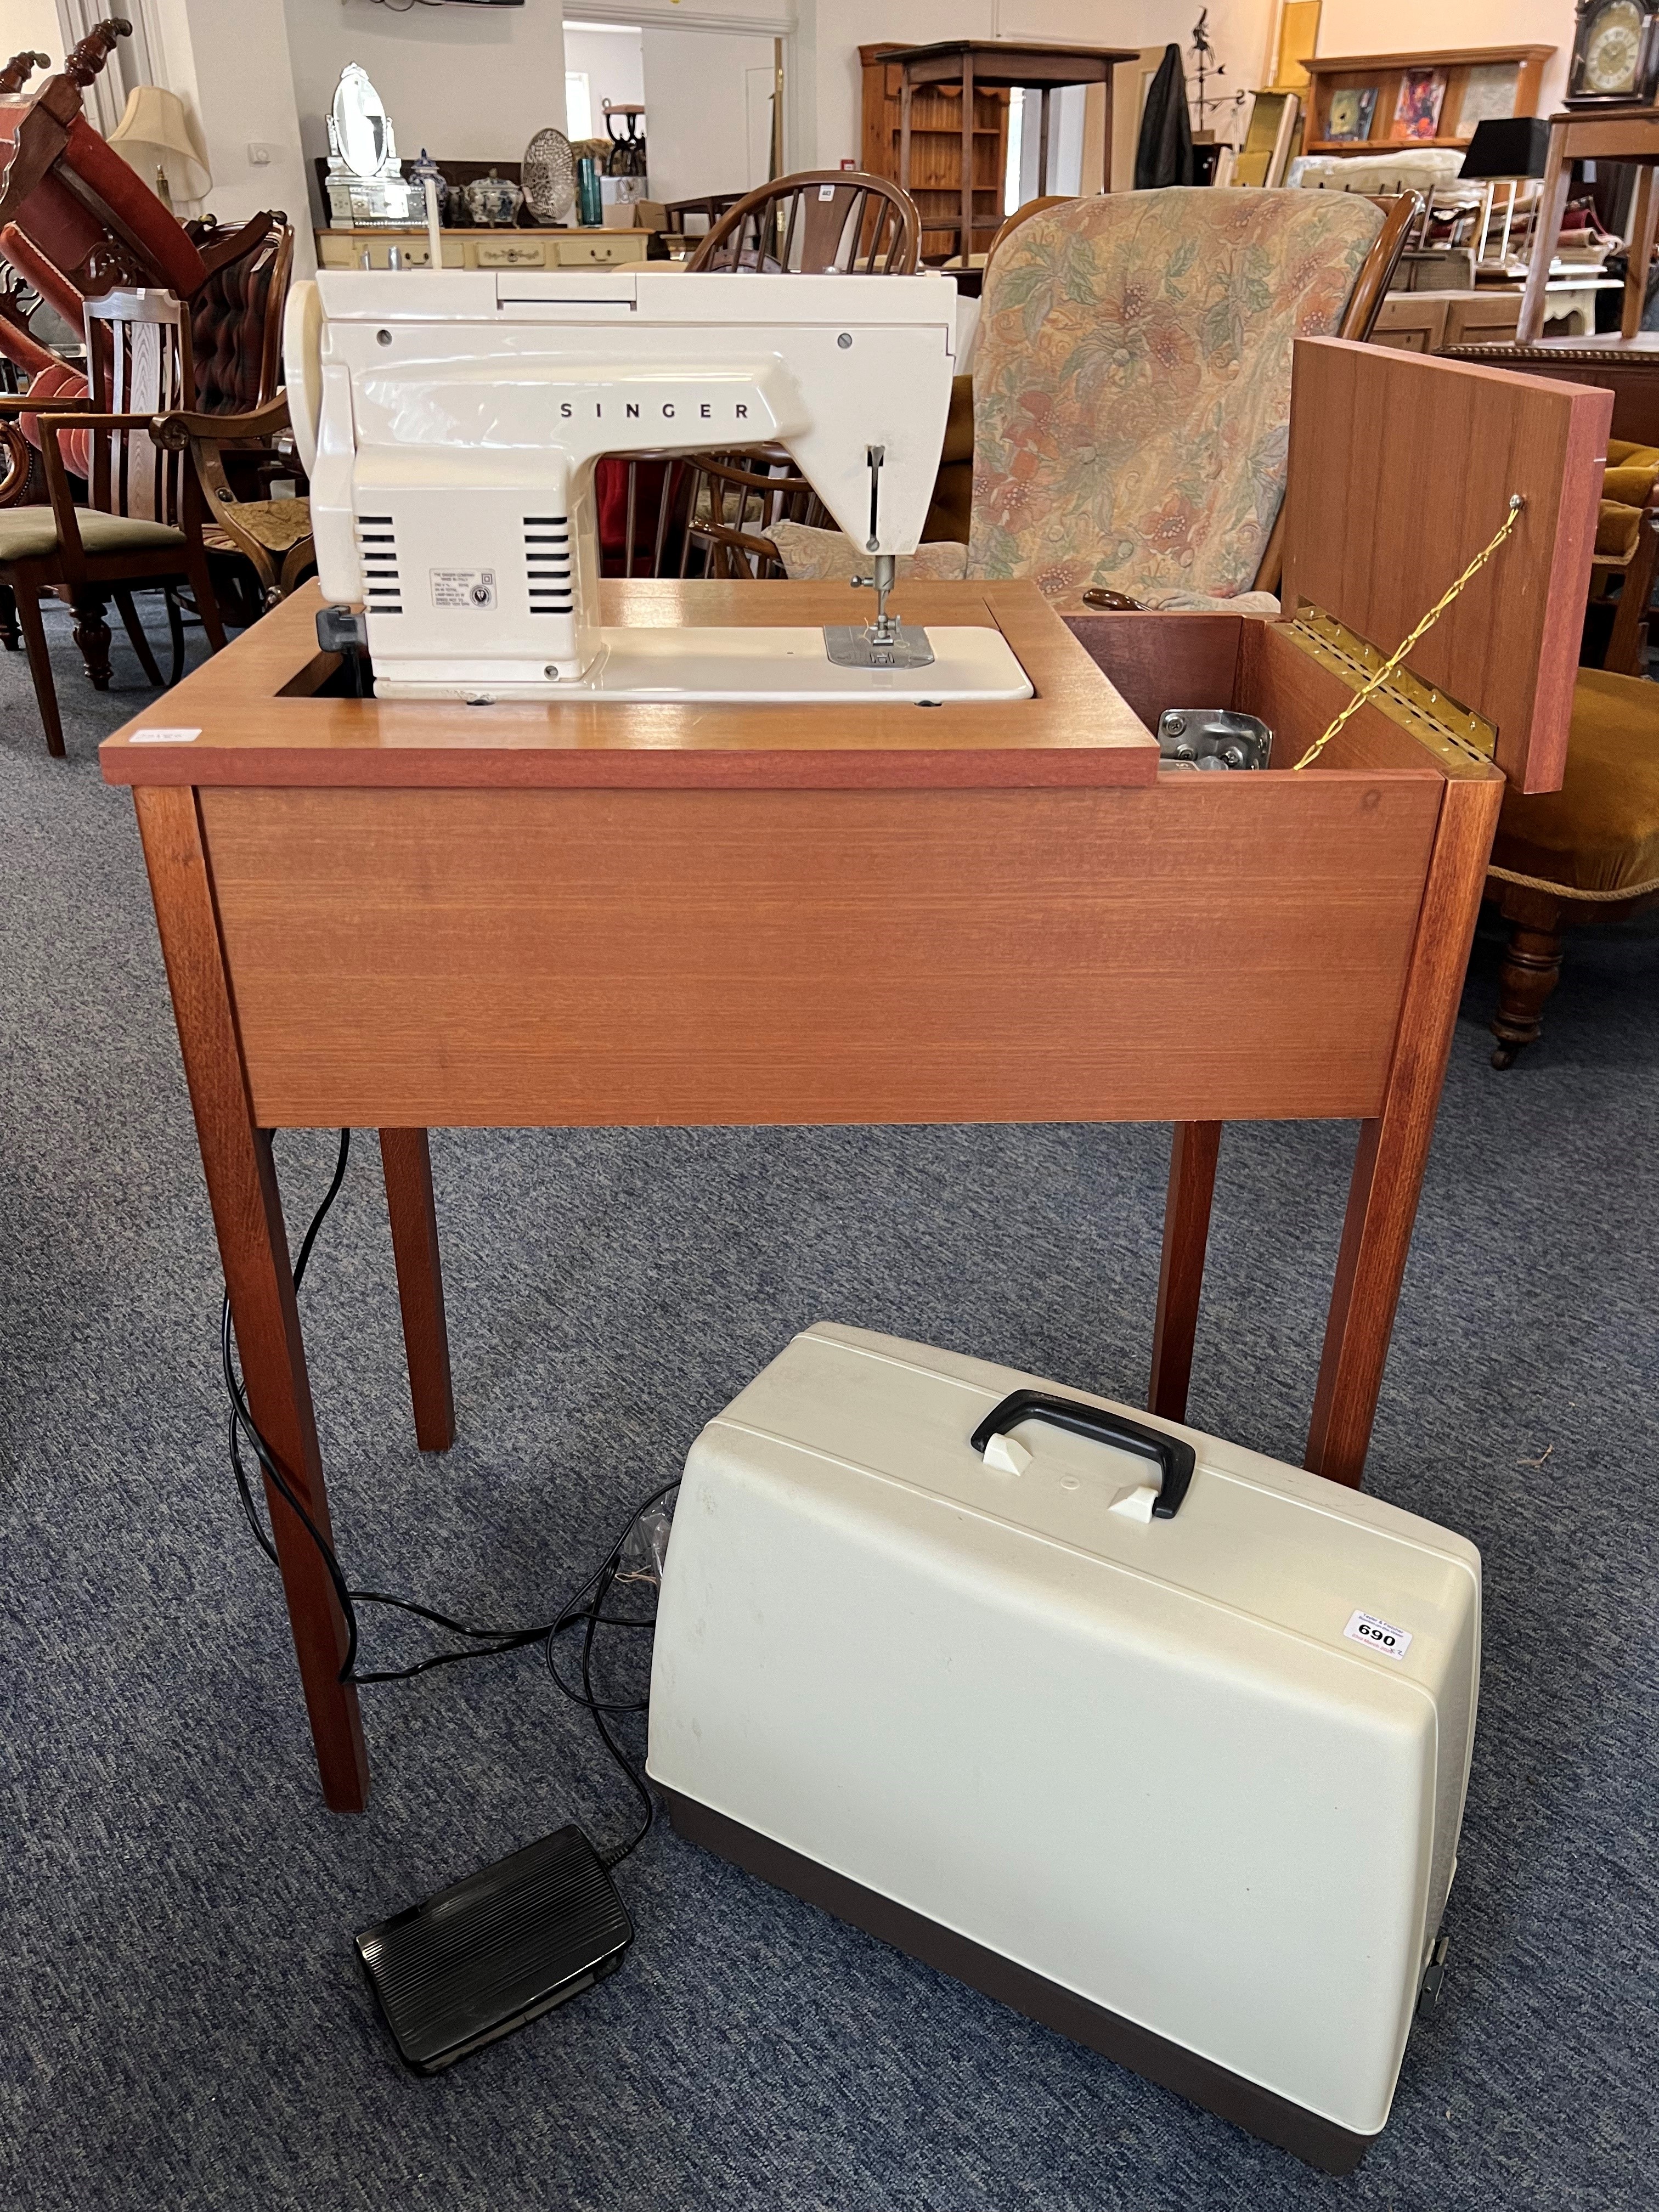 A vintage 1970s Singer 368 Fashion Mate electric sewing machine - fitted into a teak table